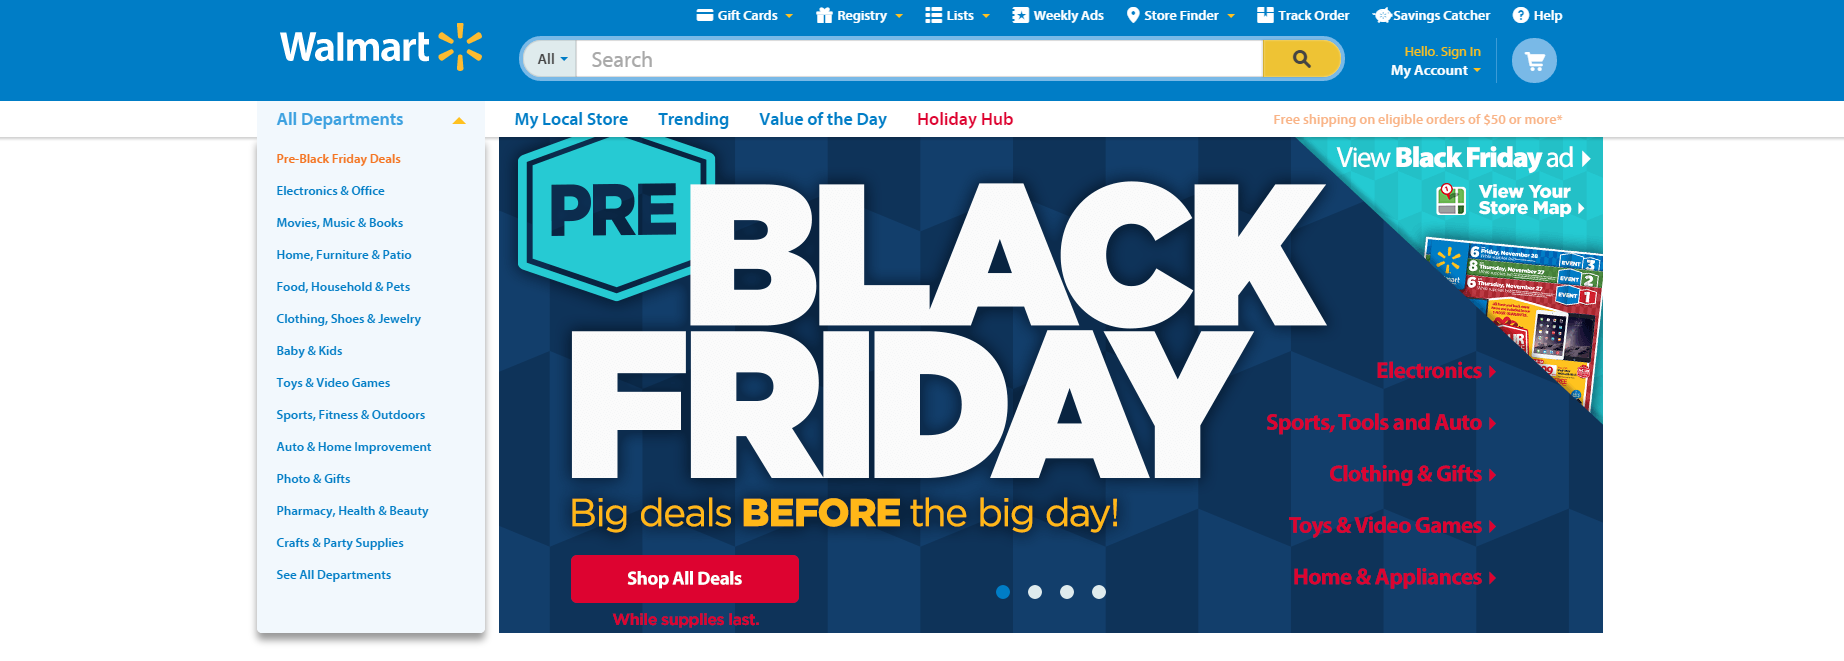 5 Effective Black Friday Landing Page Tips & Examples - Does Sprint Have Any Black Friday Deals